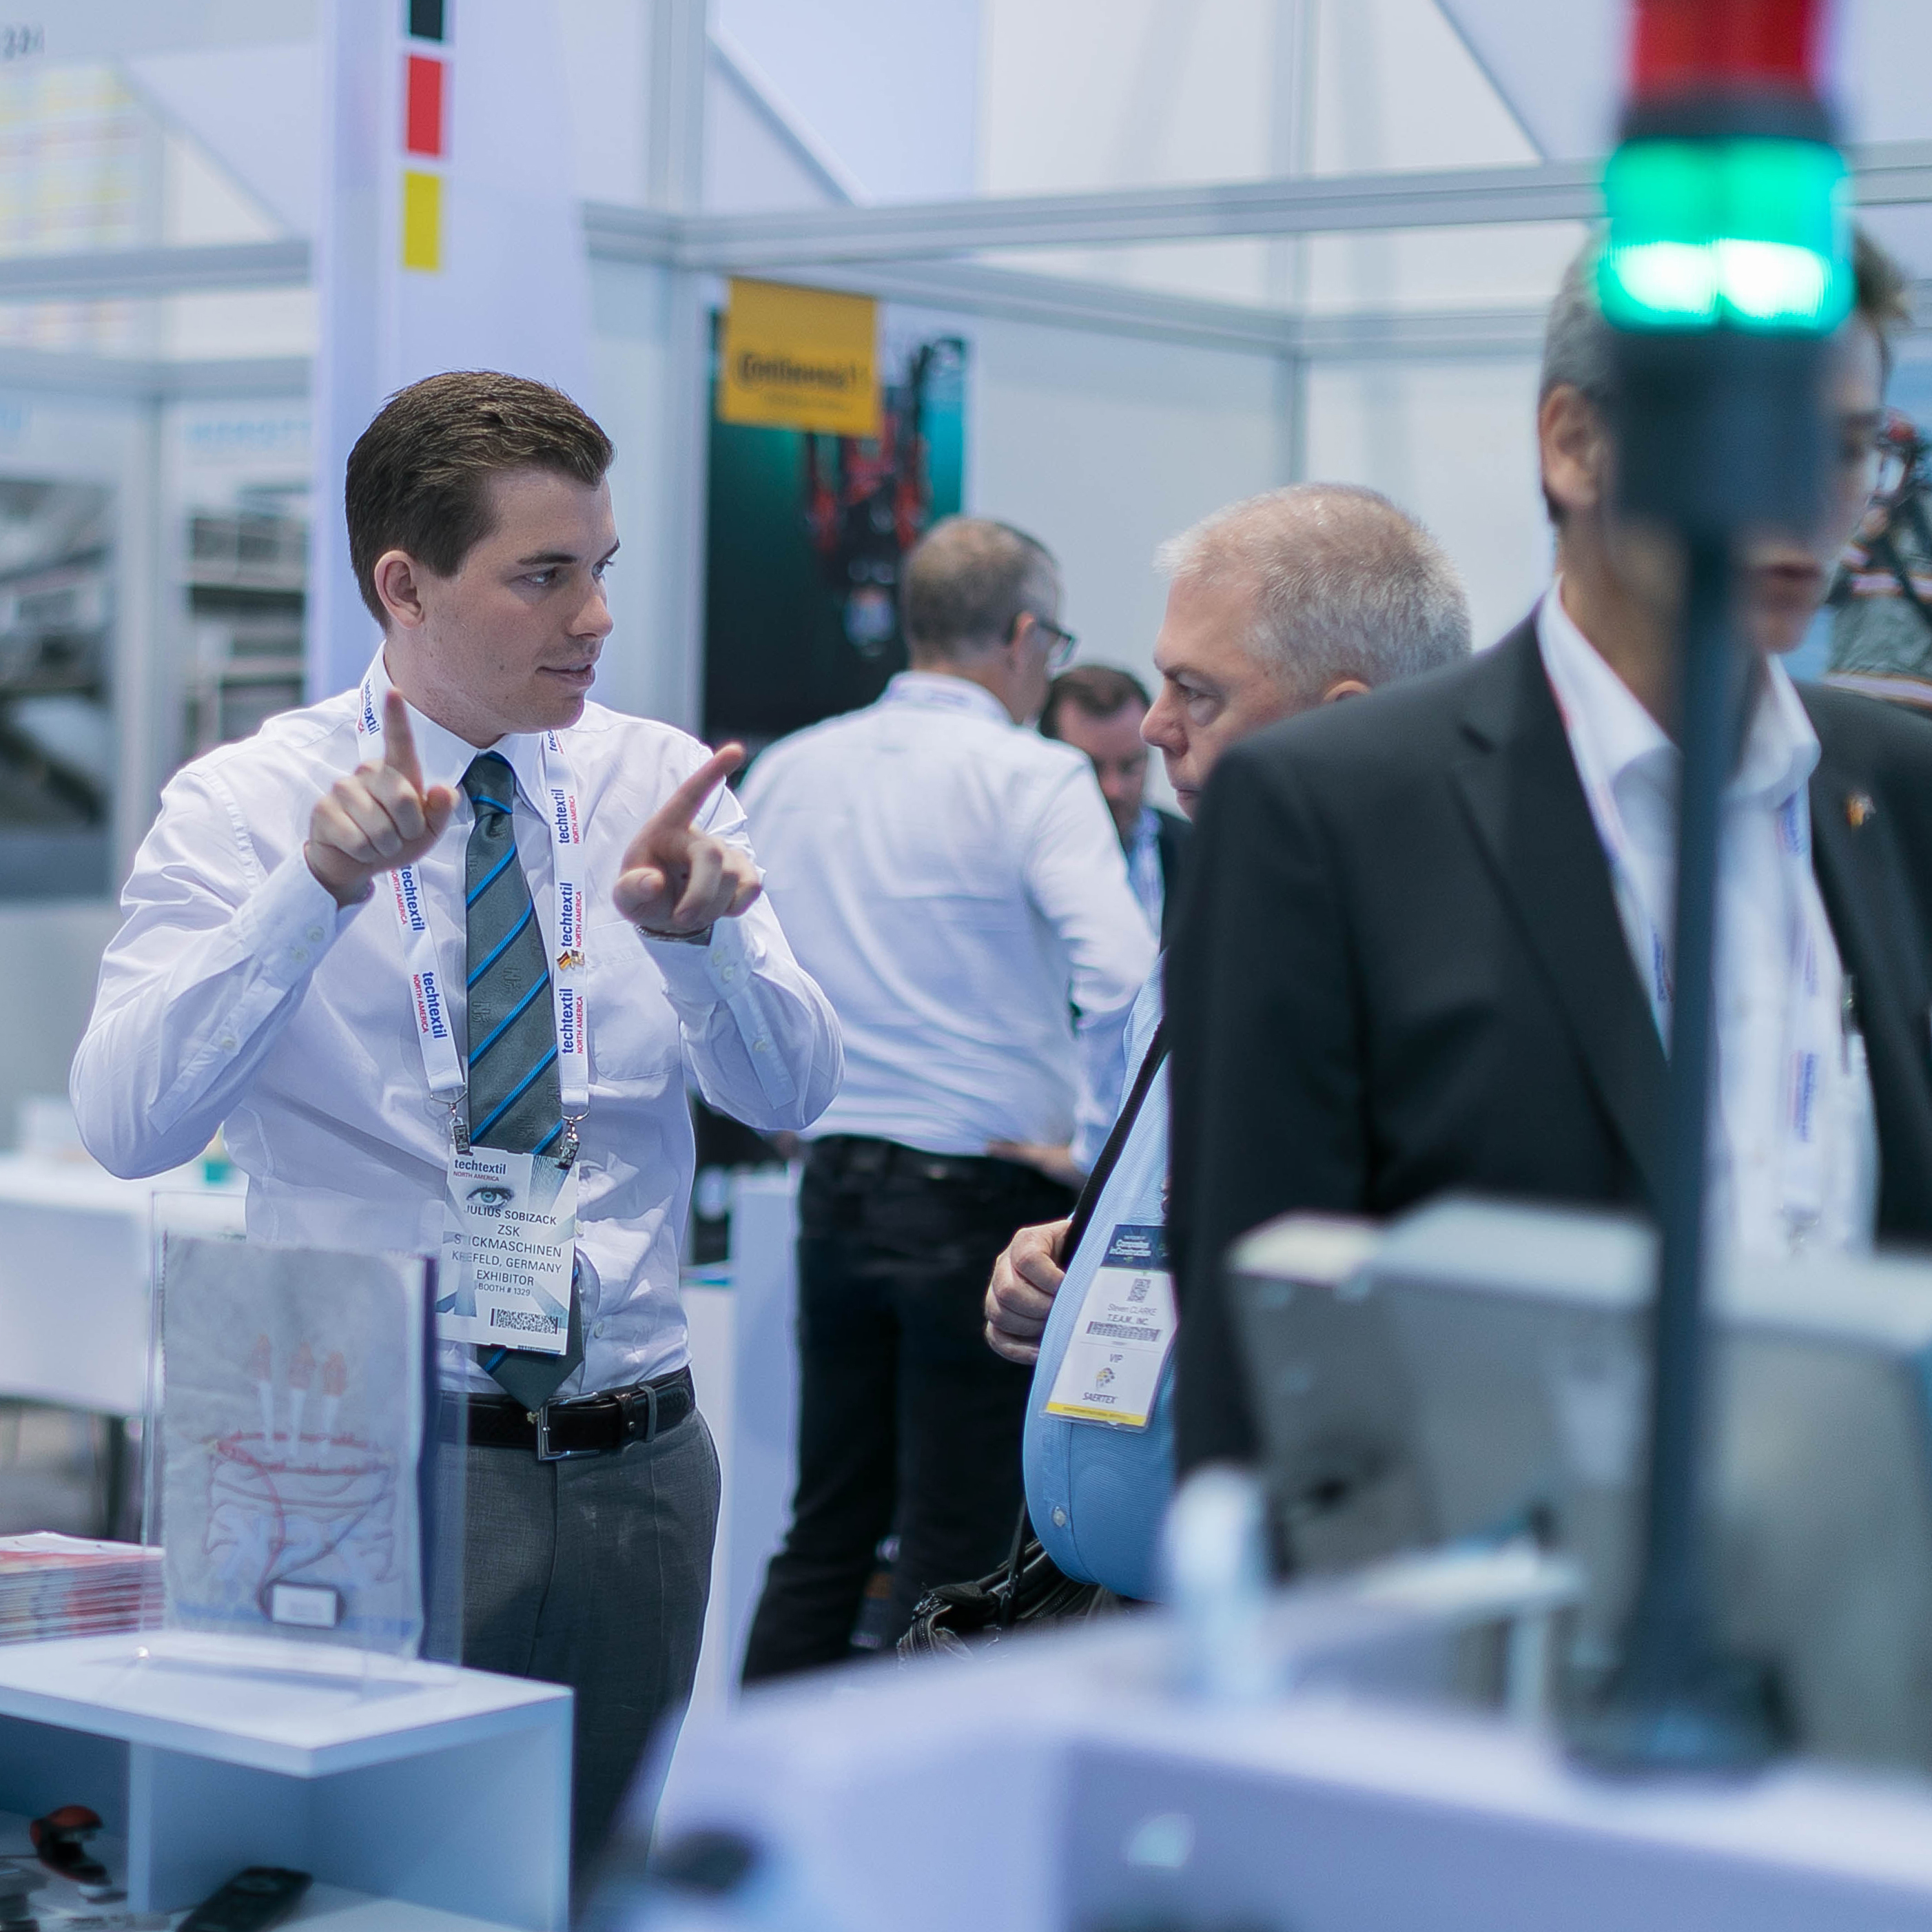 What you can expect at Techtextil North America